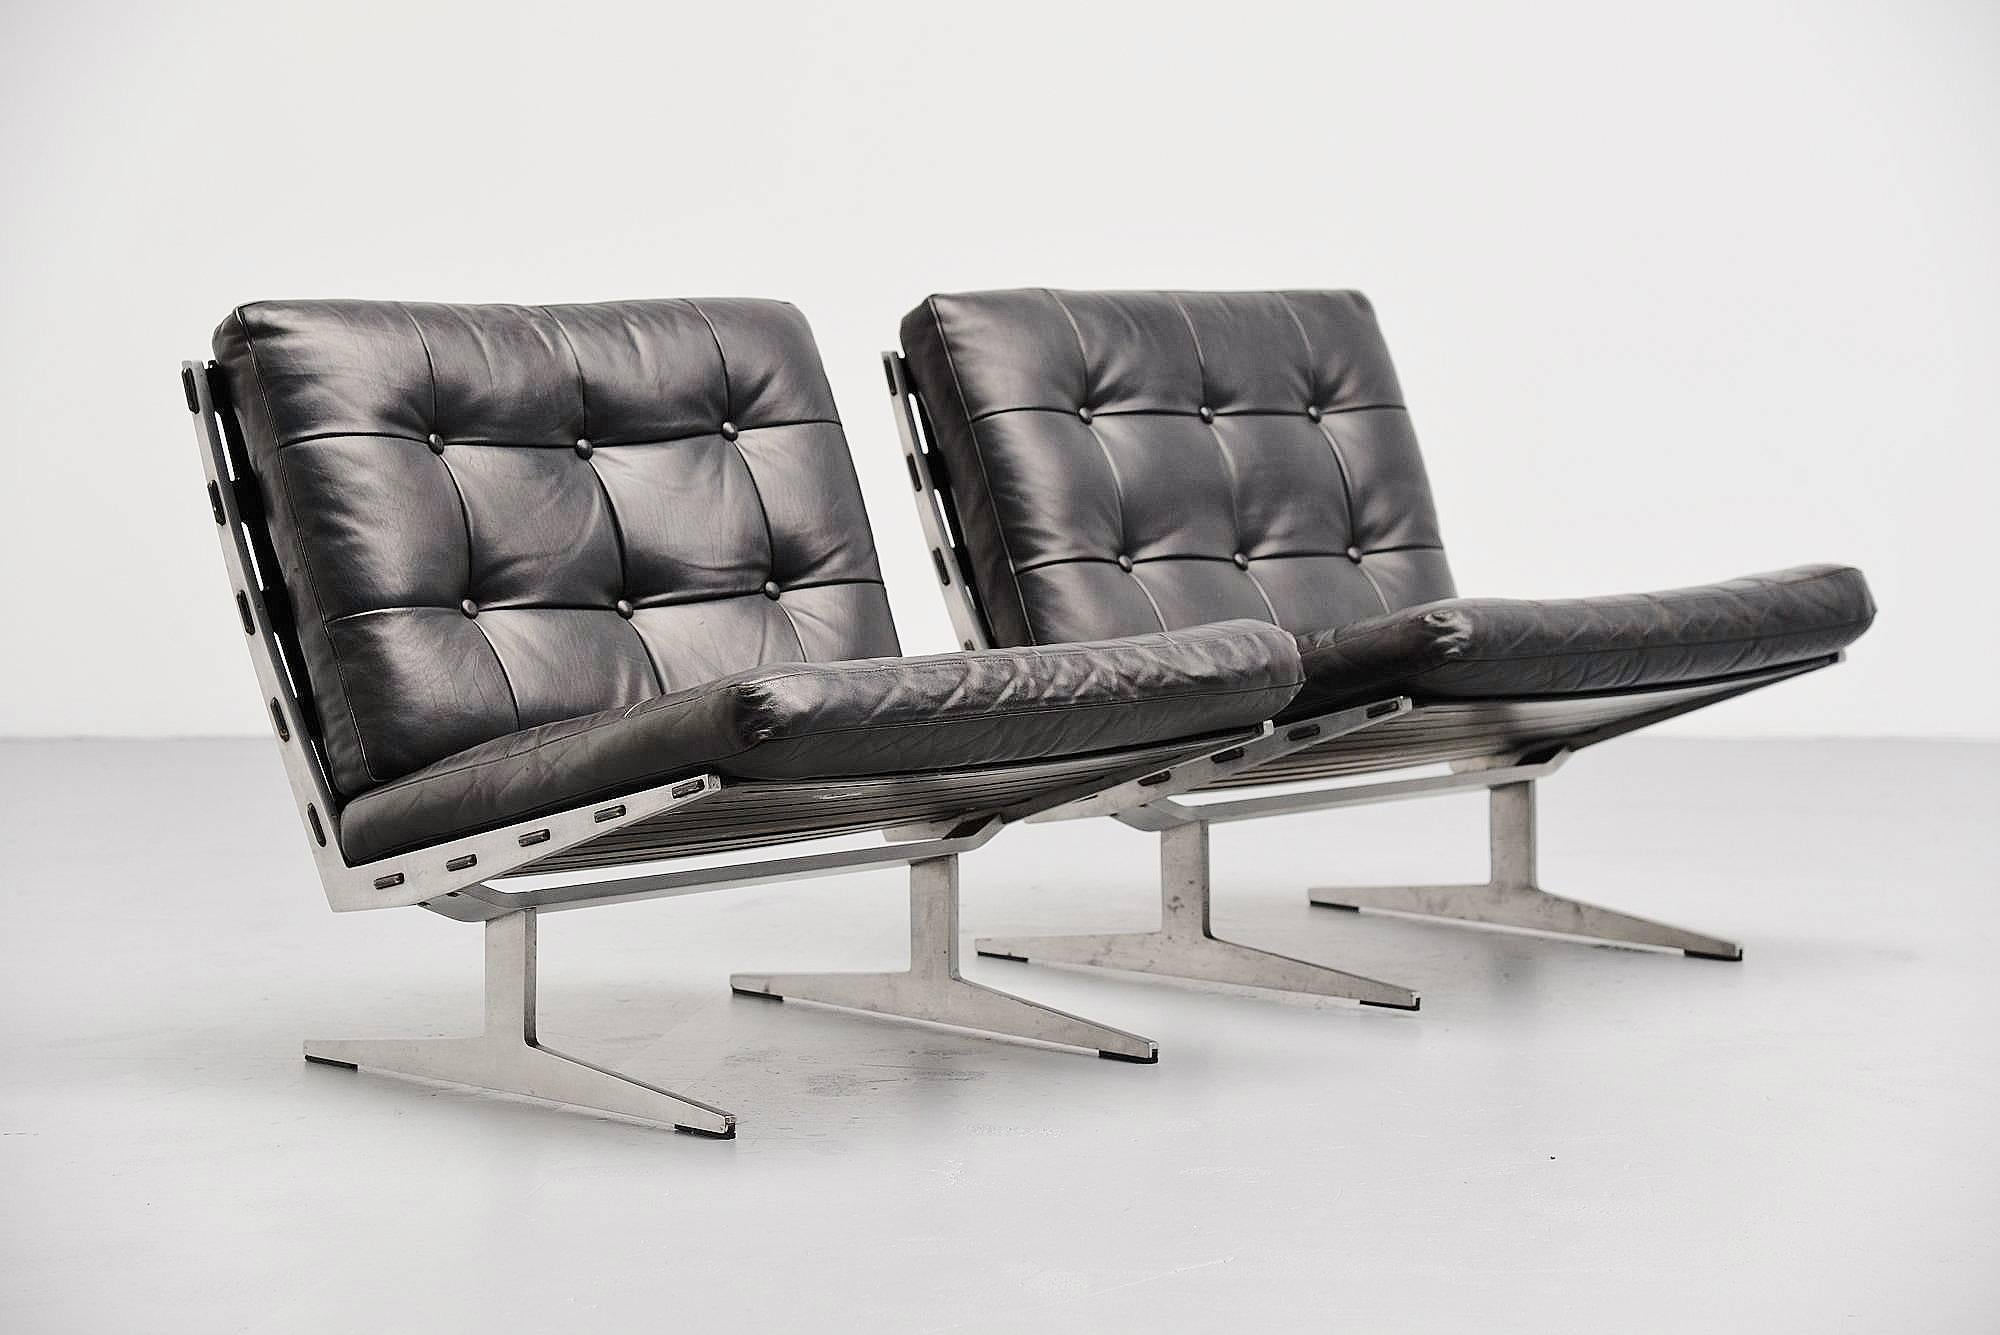 Excellent pair of lounge chairs designed by Paul Leidersdorff and manufactured by A. Leidersdorffsen A/S, Denmark, 1965. These chairs are made of solid aluminium slipper frames, with black lacquered plywood seat and back and tufted leather cushions.